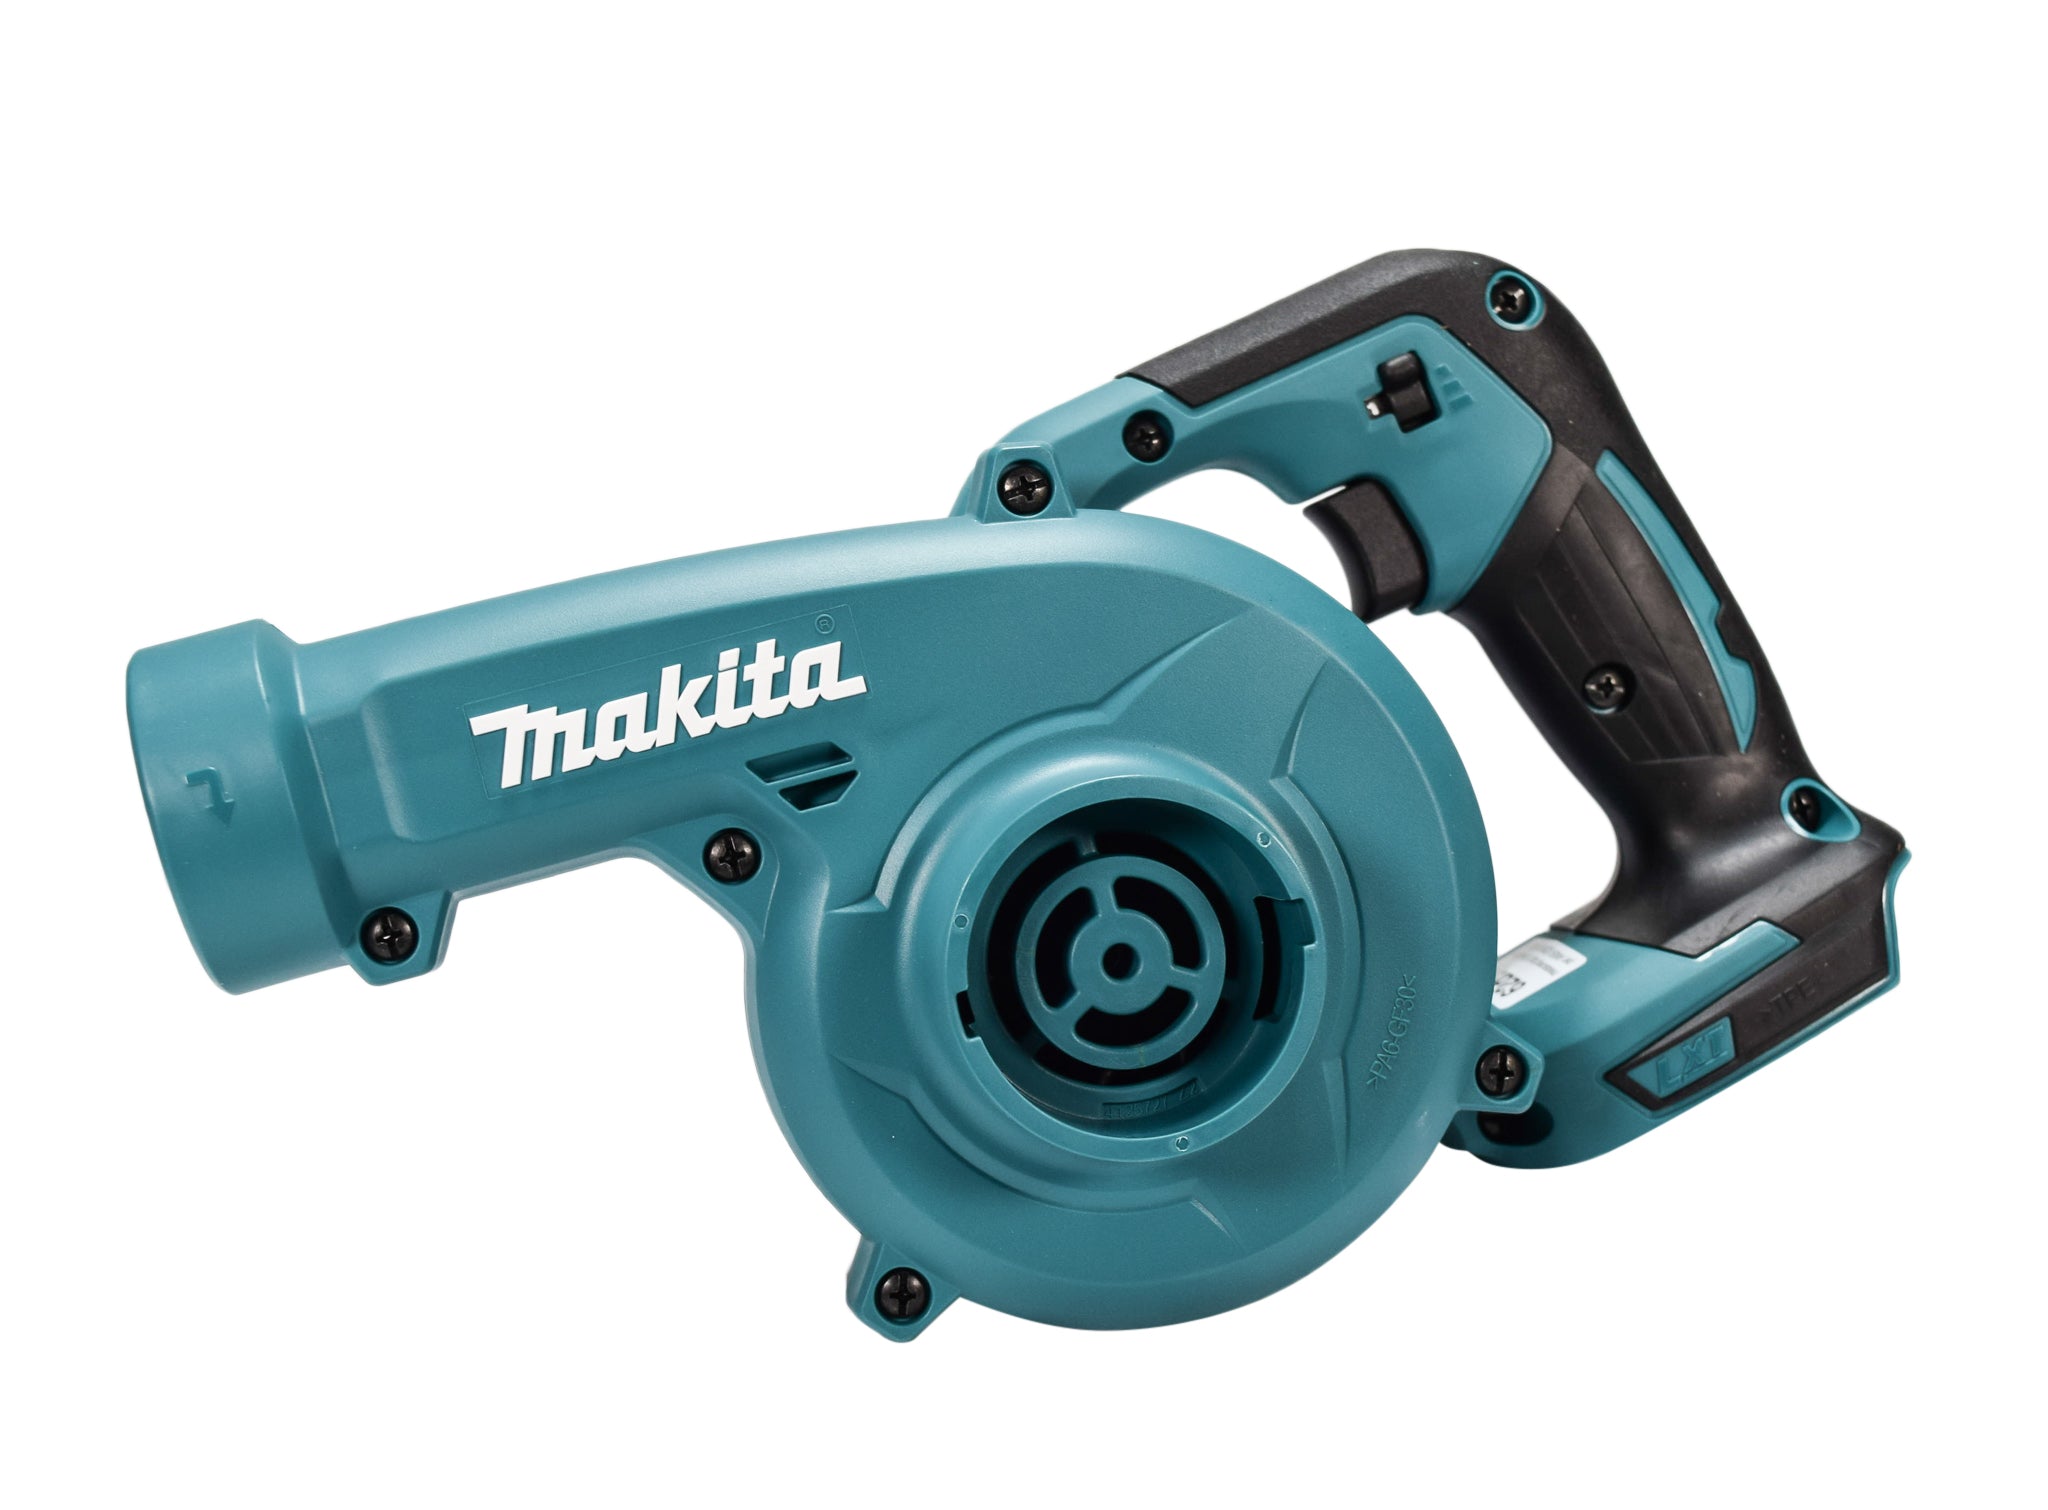 Makita XBU05Z Lithium-Ion Cordless 18V LXT Blower, Tool Only, Teal